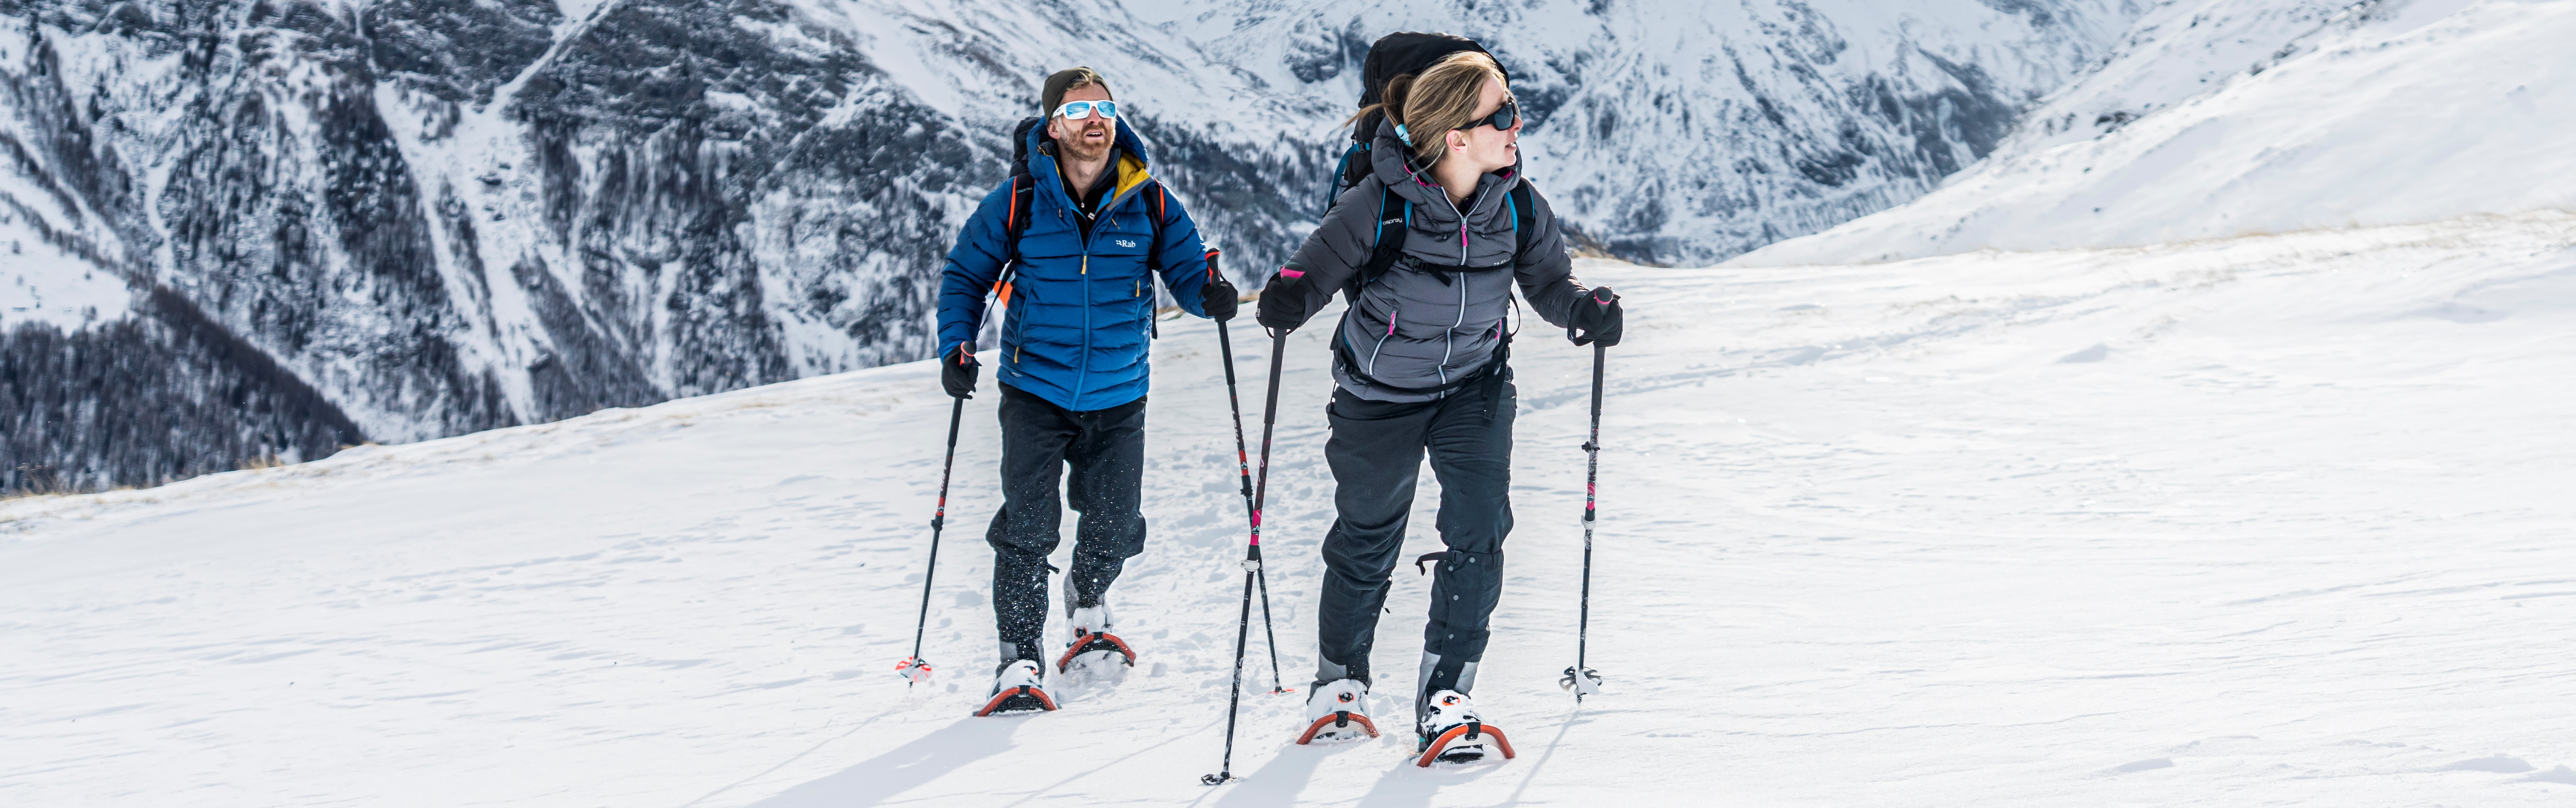 Mountain skiers scaling back up in their Nikwax treated waterproof and sweatproof layers.